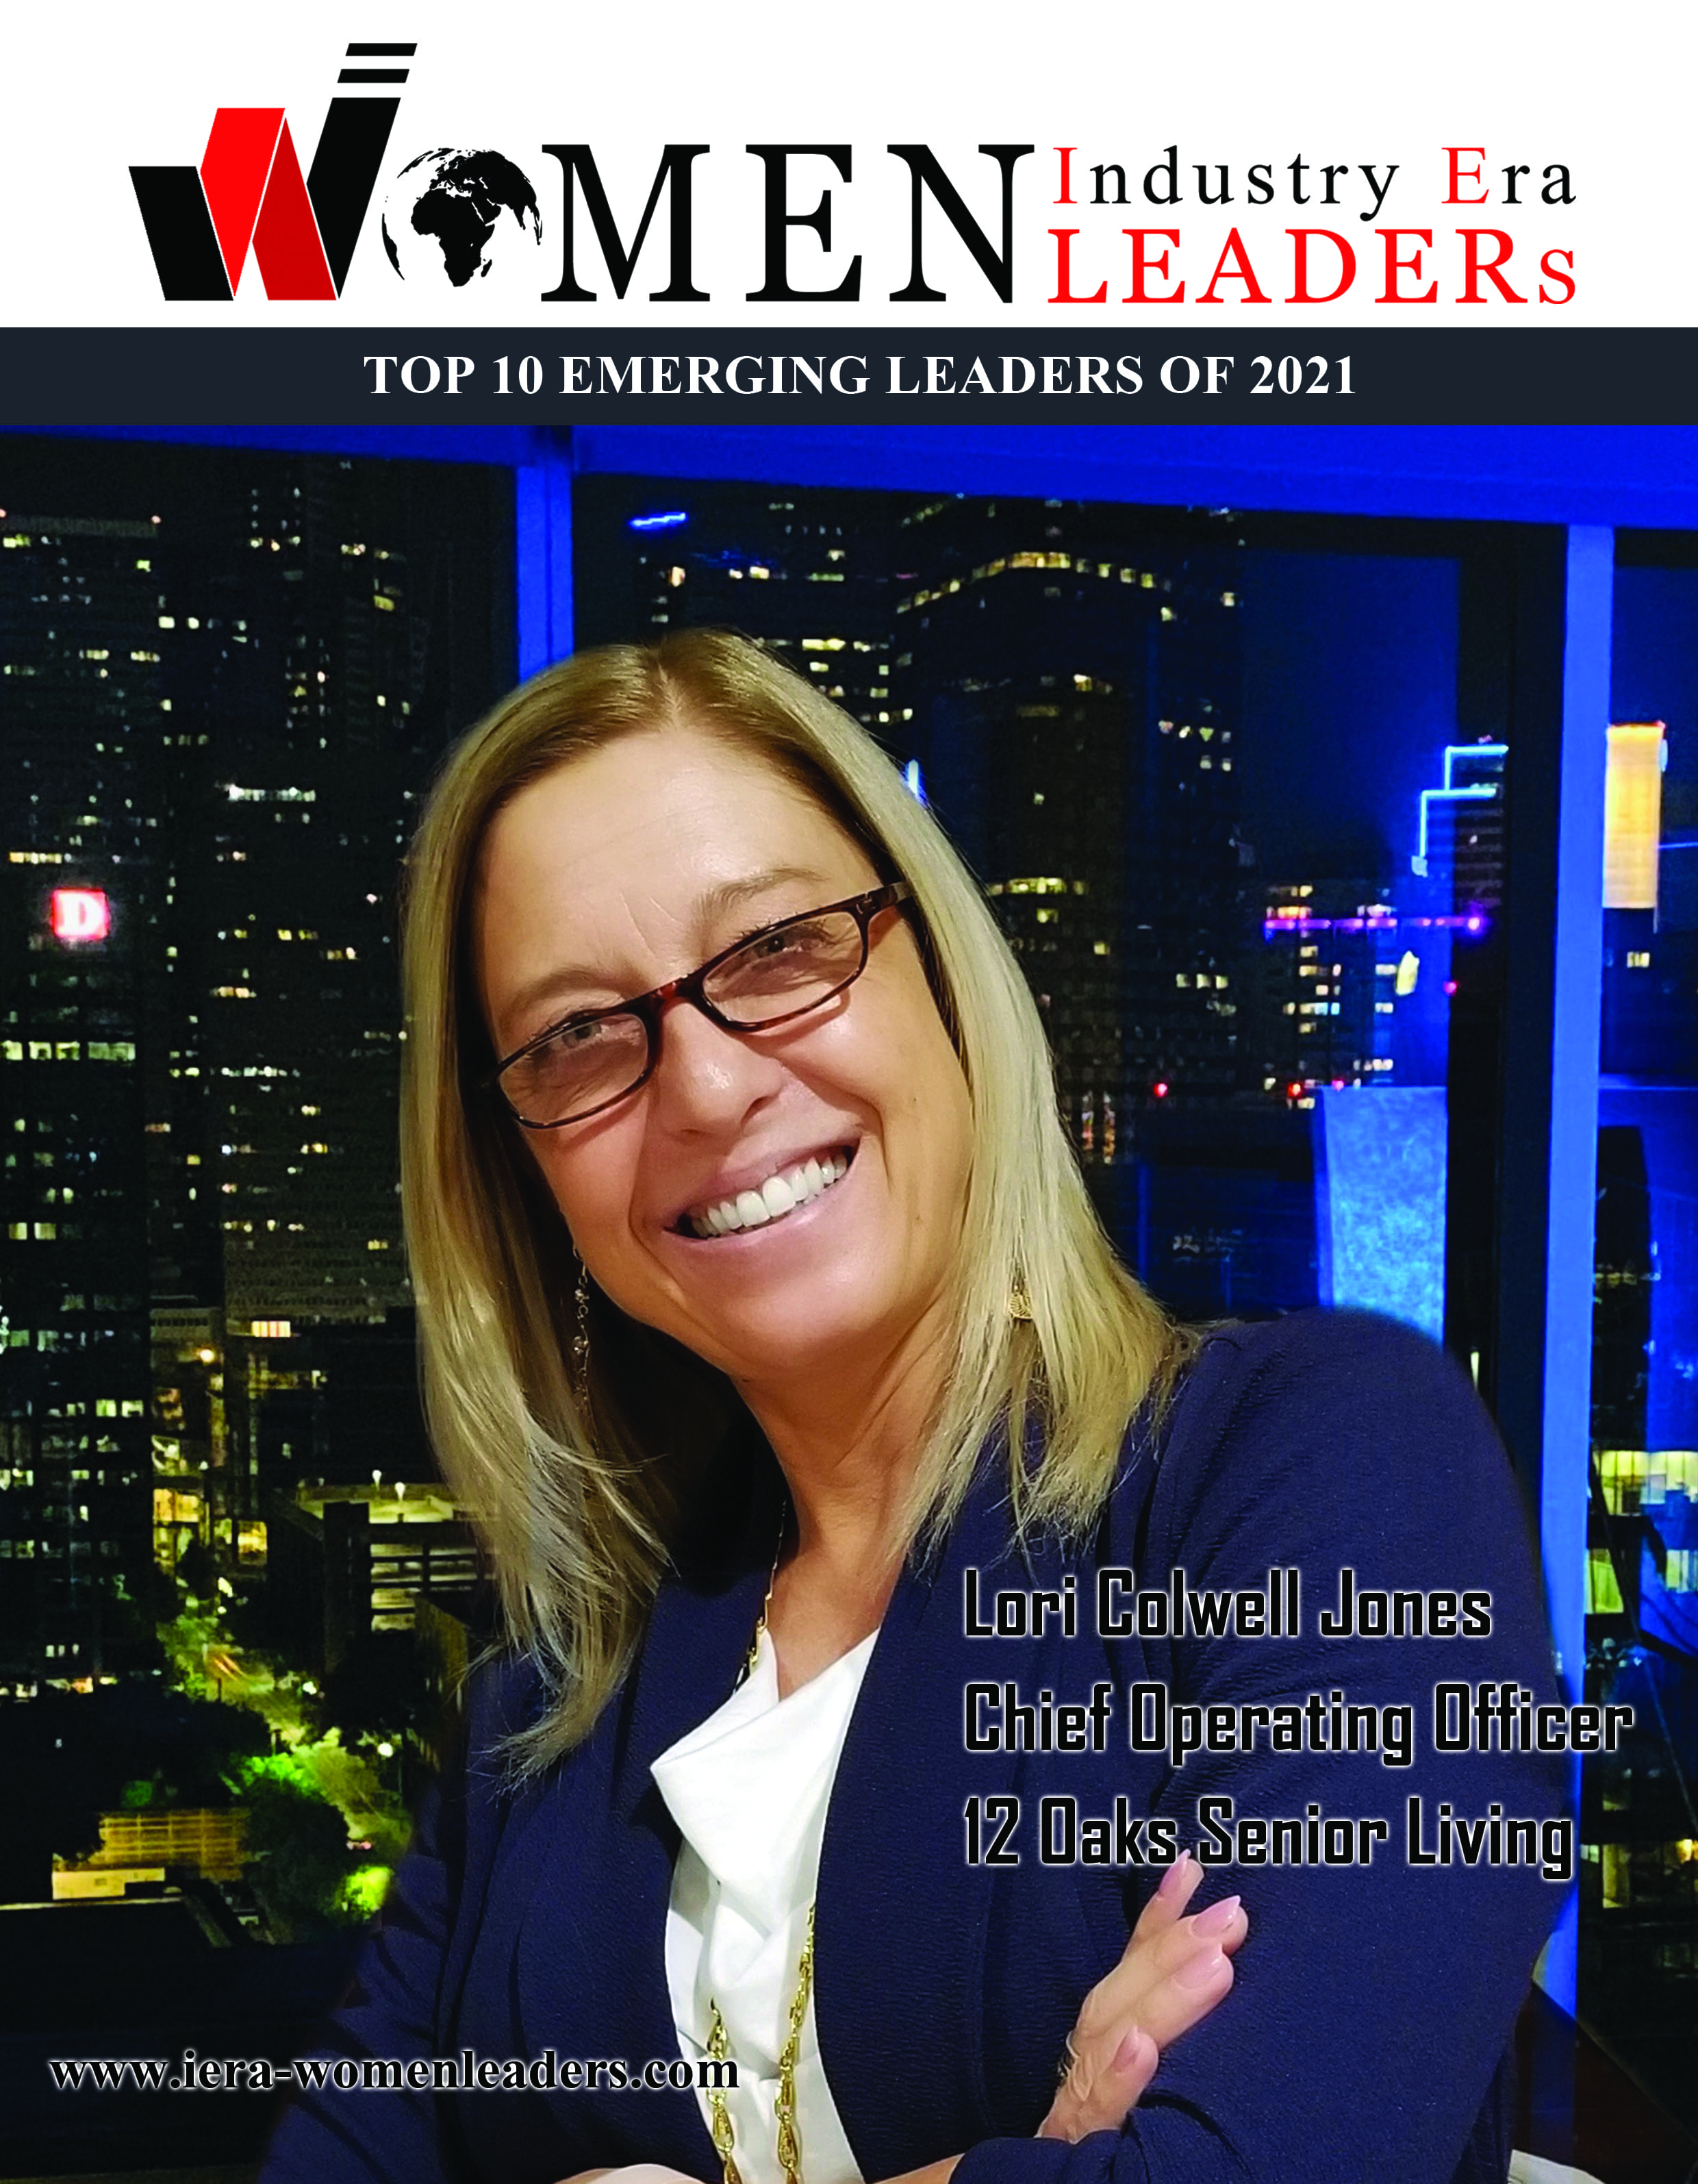 10 Most Emerging Women Leaders of 2021 Magazine